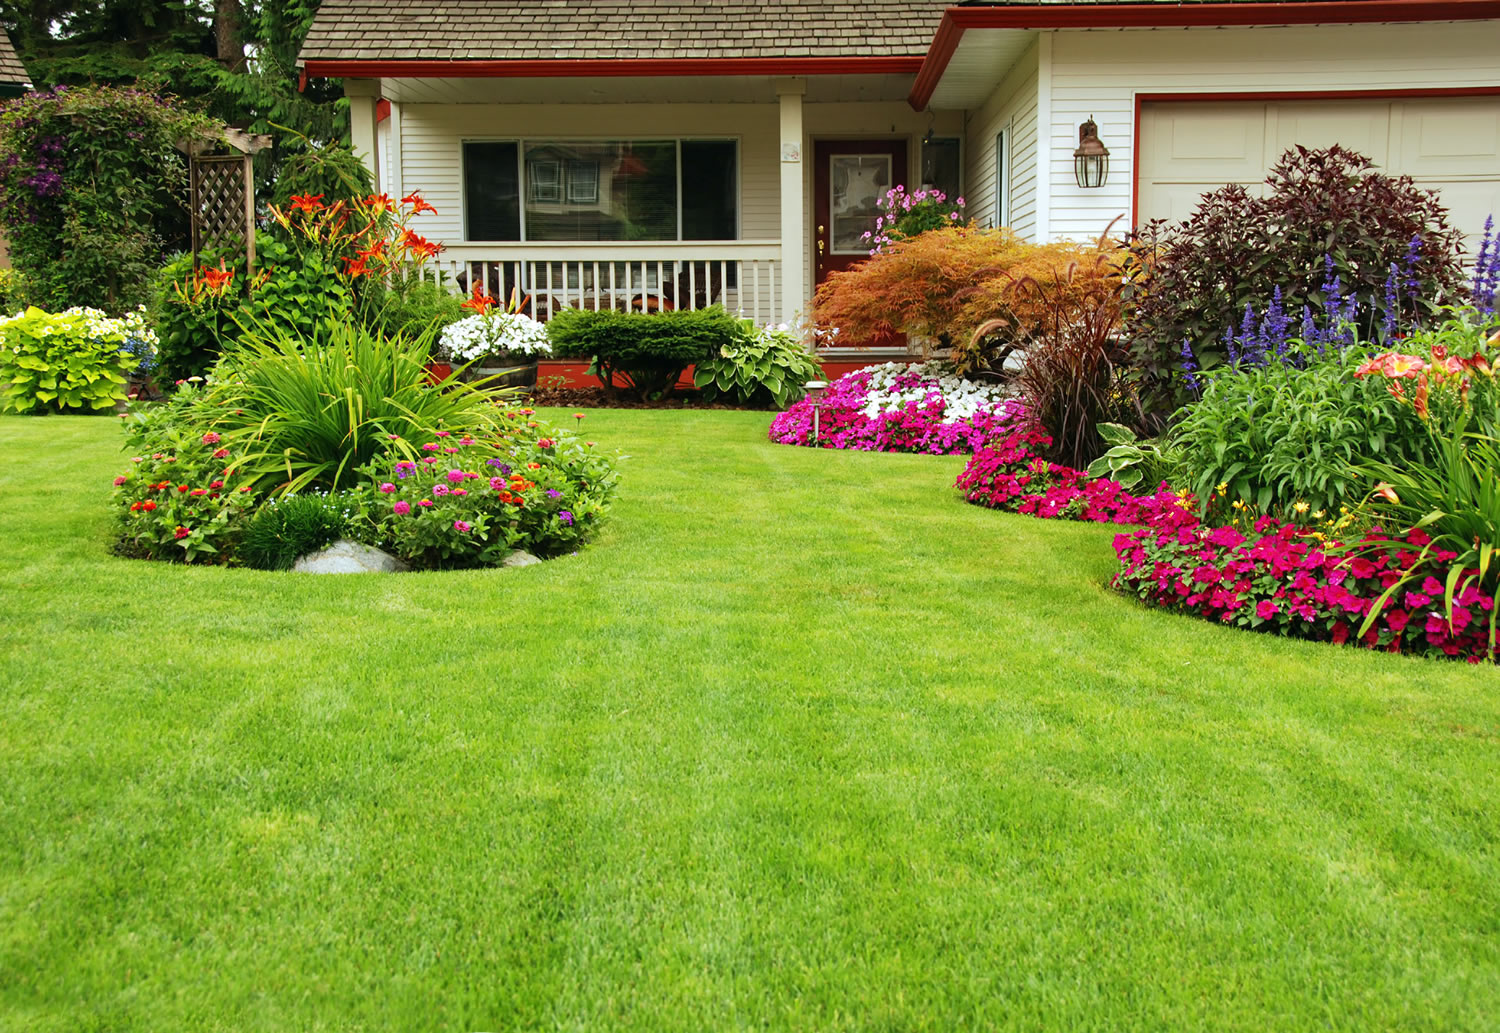 Plush green lawn and landscaped areas with flowers